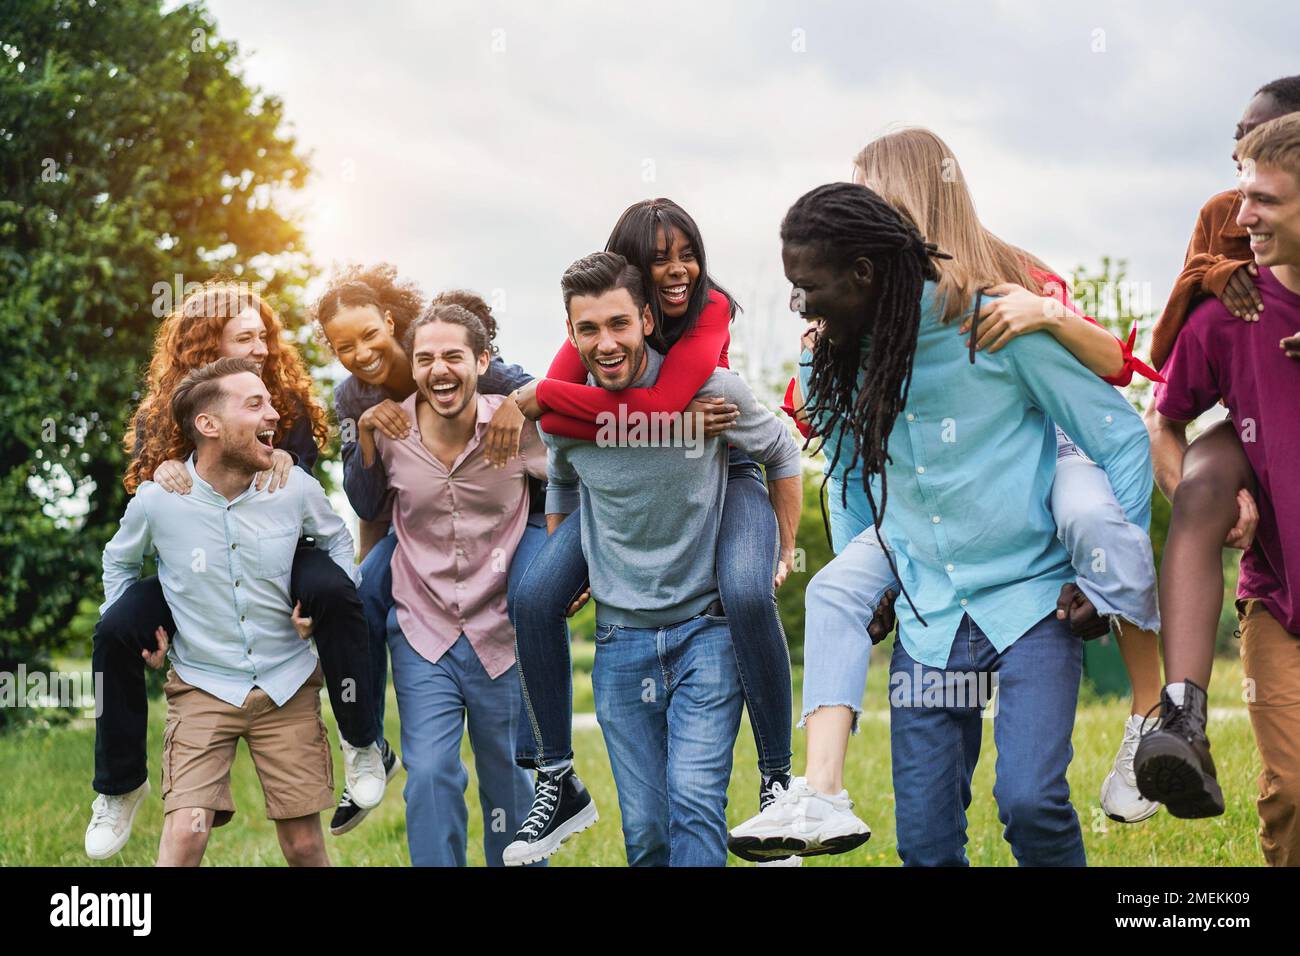 Young diverse friends having fun outdoor laughing together - Focus on center african girl face Stock Photo